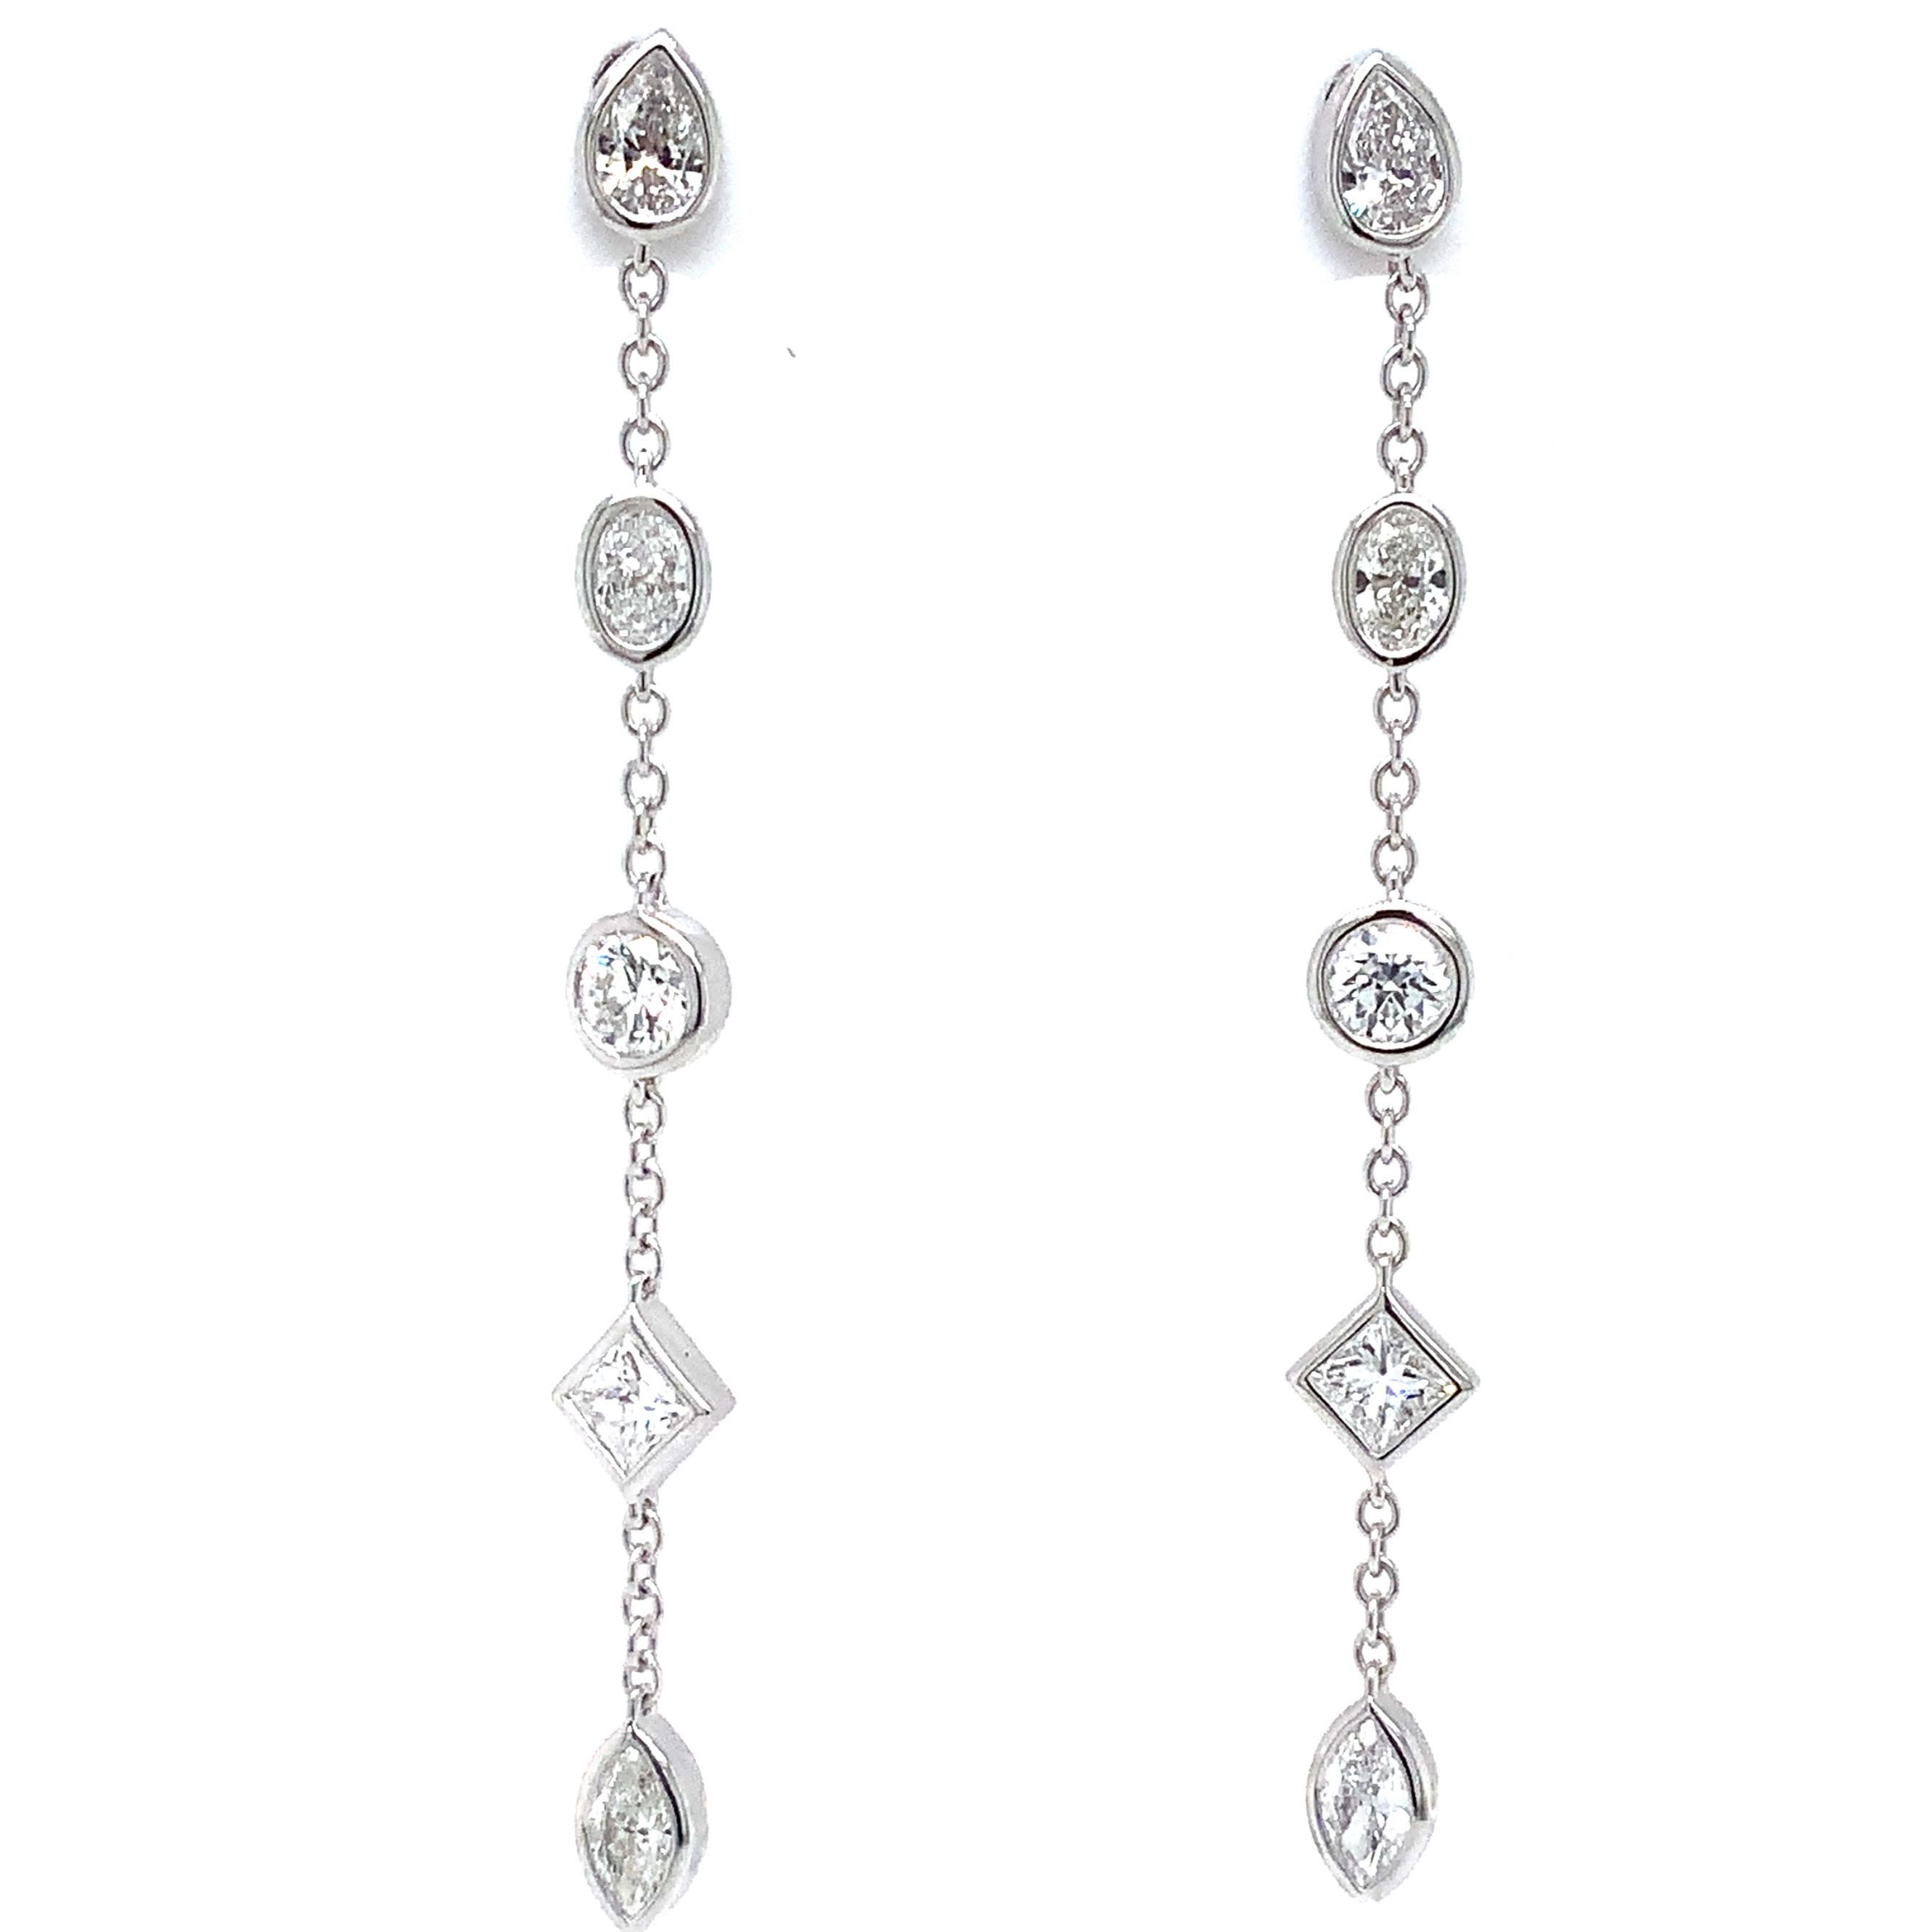 Memoire's Cascade Mixed Cut Fancy Shaped Diamond Drop Earrings are crafted from 18K White Gold. This chic, modern design makes a stunning addition to any jewelry collection. These earrings feature 10 bezel-set diamonds totaling 1.00 ct t.w.,